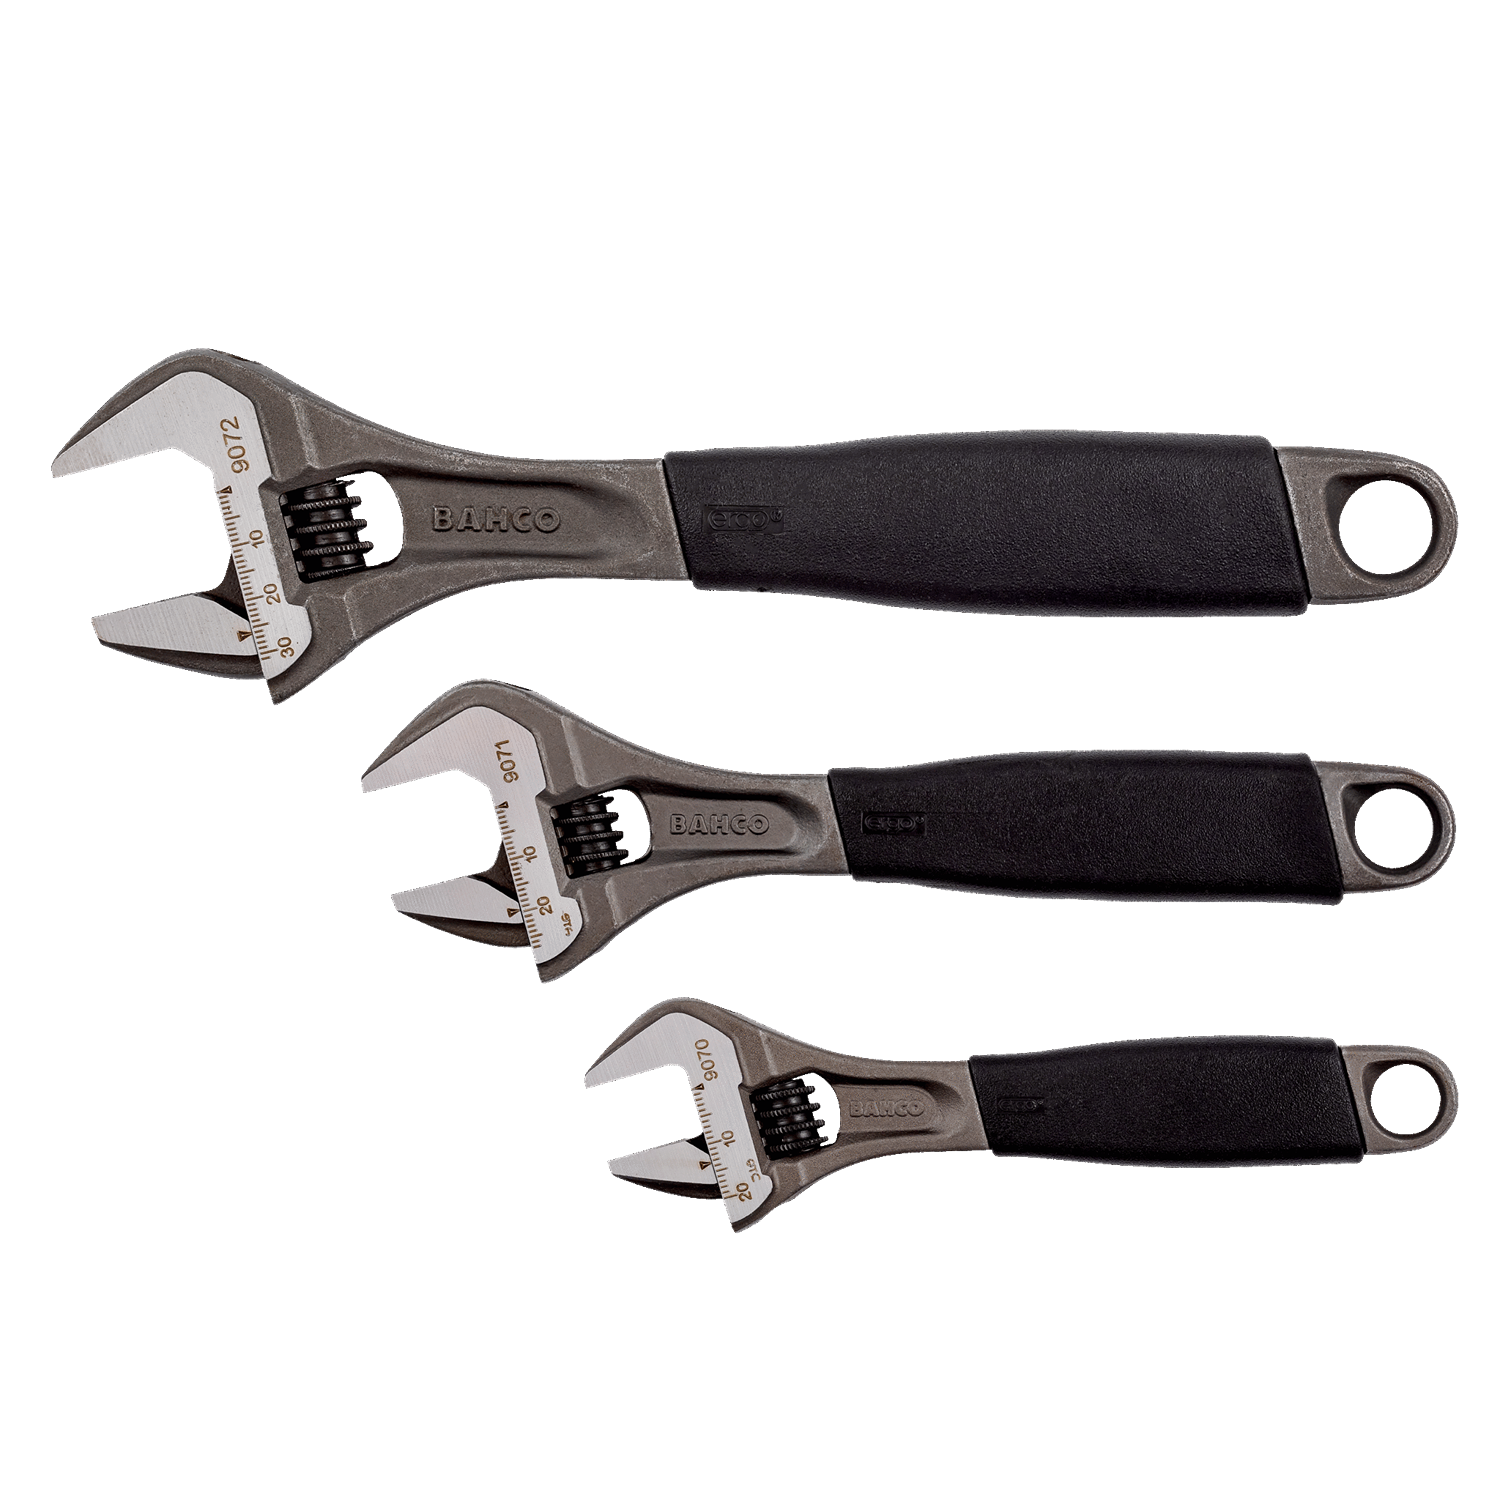 BAHCO ADJUST3-90 ERGO Central Nut Adjustable Wrench Set - Premium Adjustable Wrench Set from BAHCO - Shop now at Yew Aik.